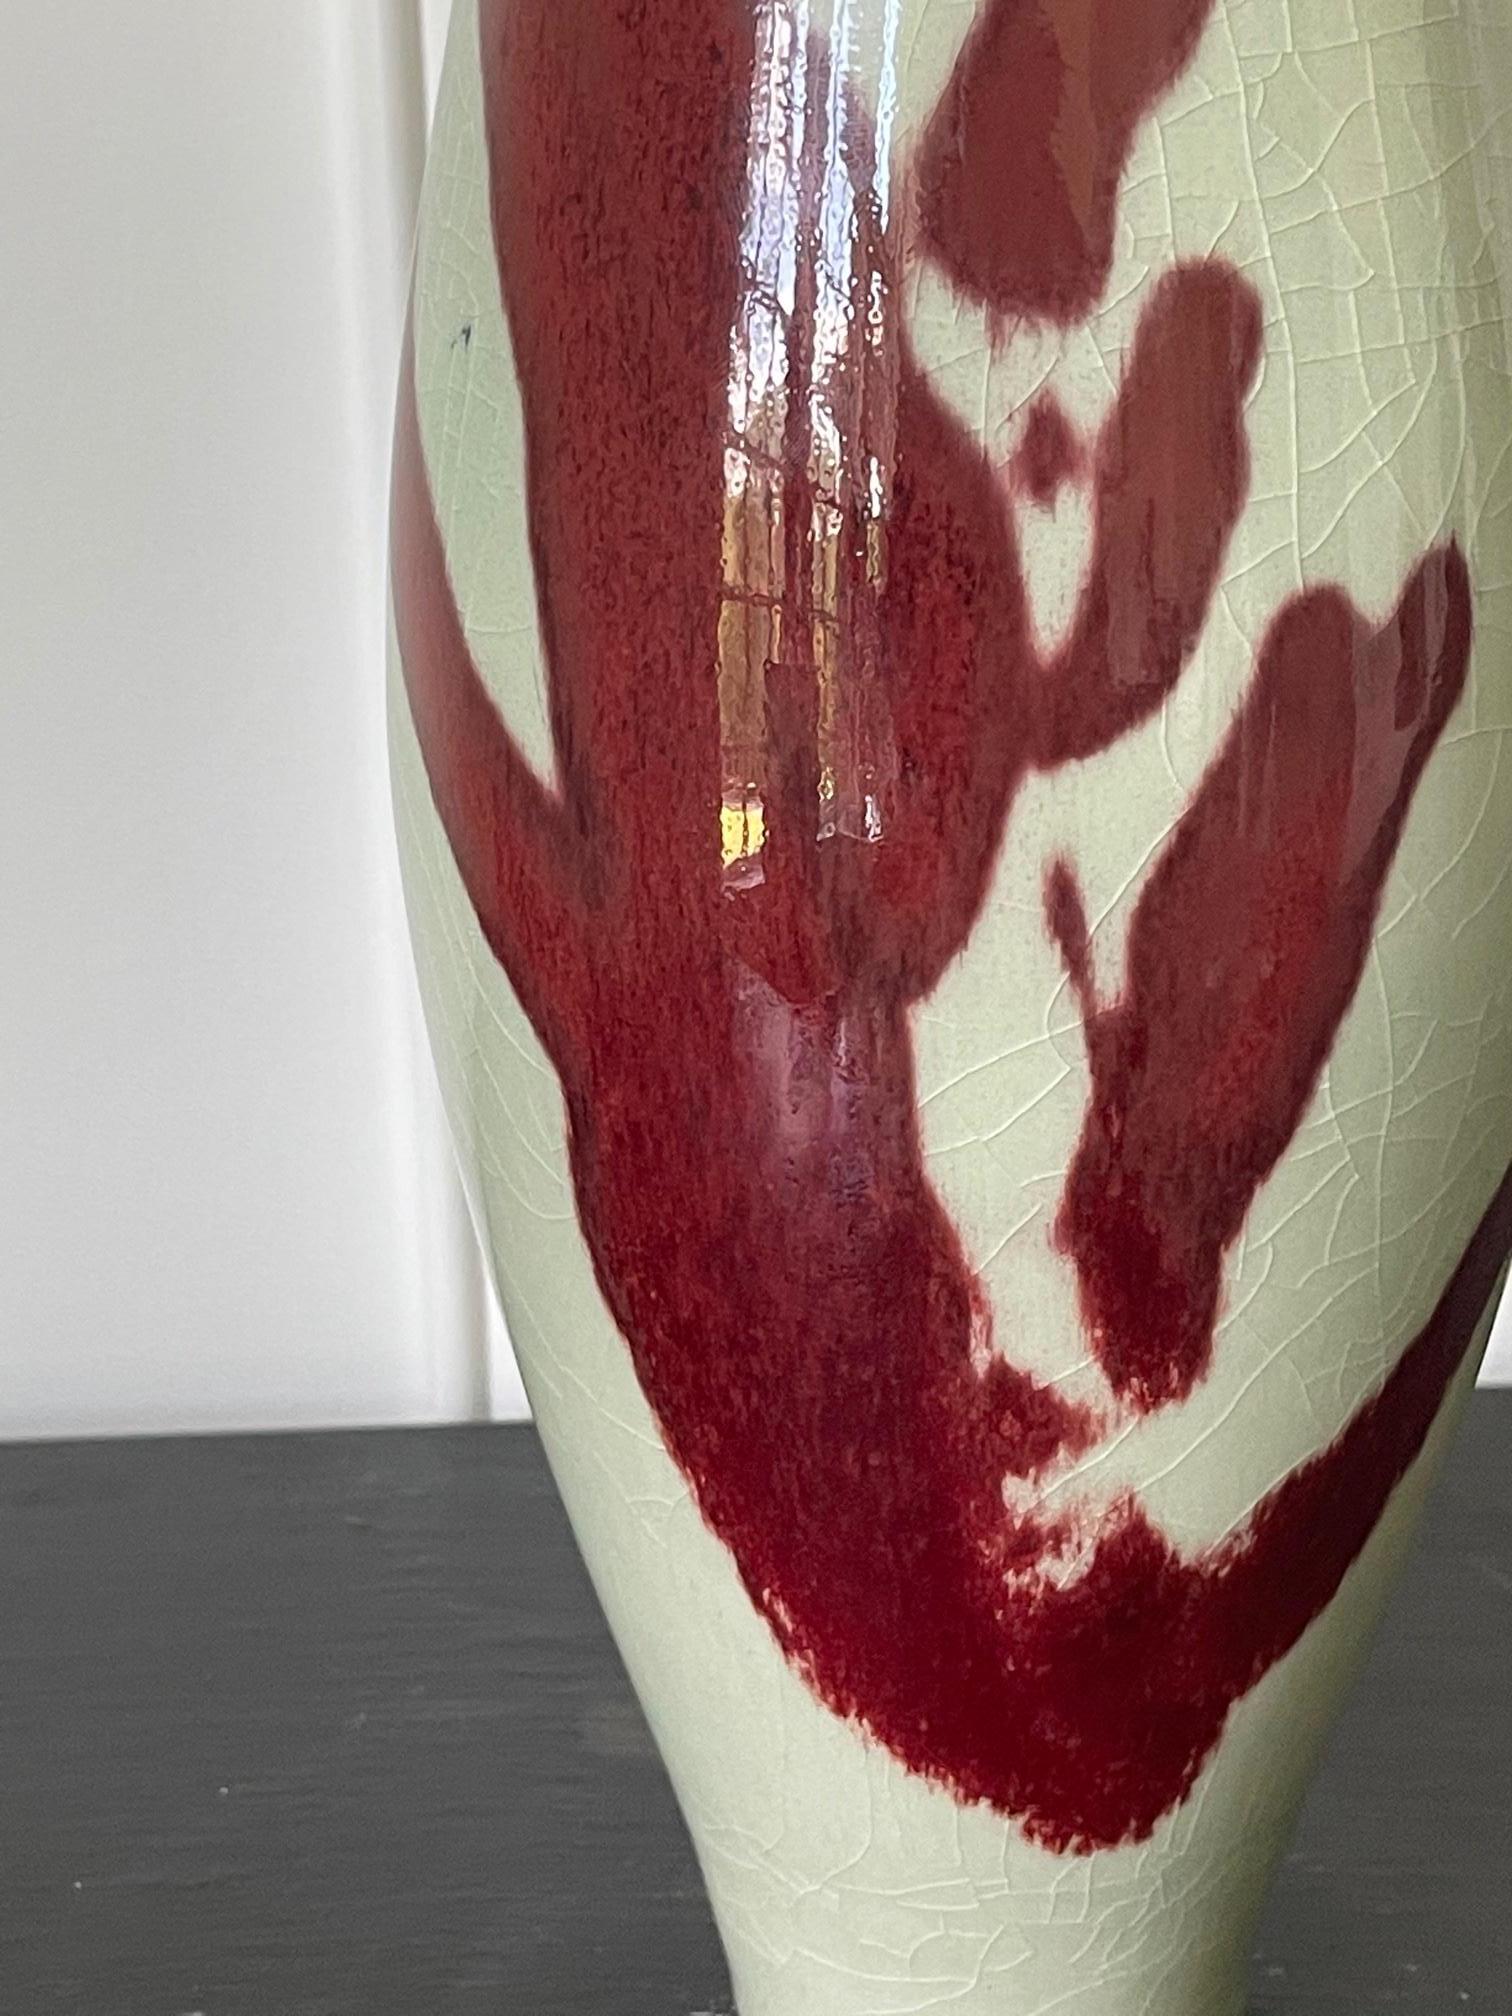 Porcelain Celadon Vase with Copper Glaze by Brother Thomas Bezanson In Good Condition For Sale In Atlanta, GA